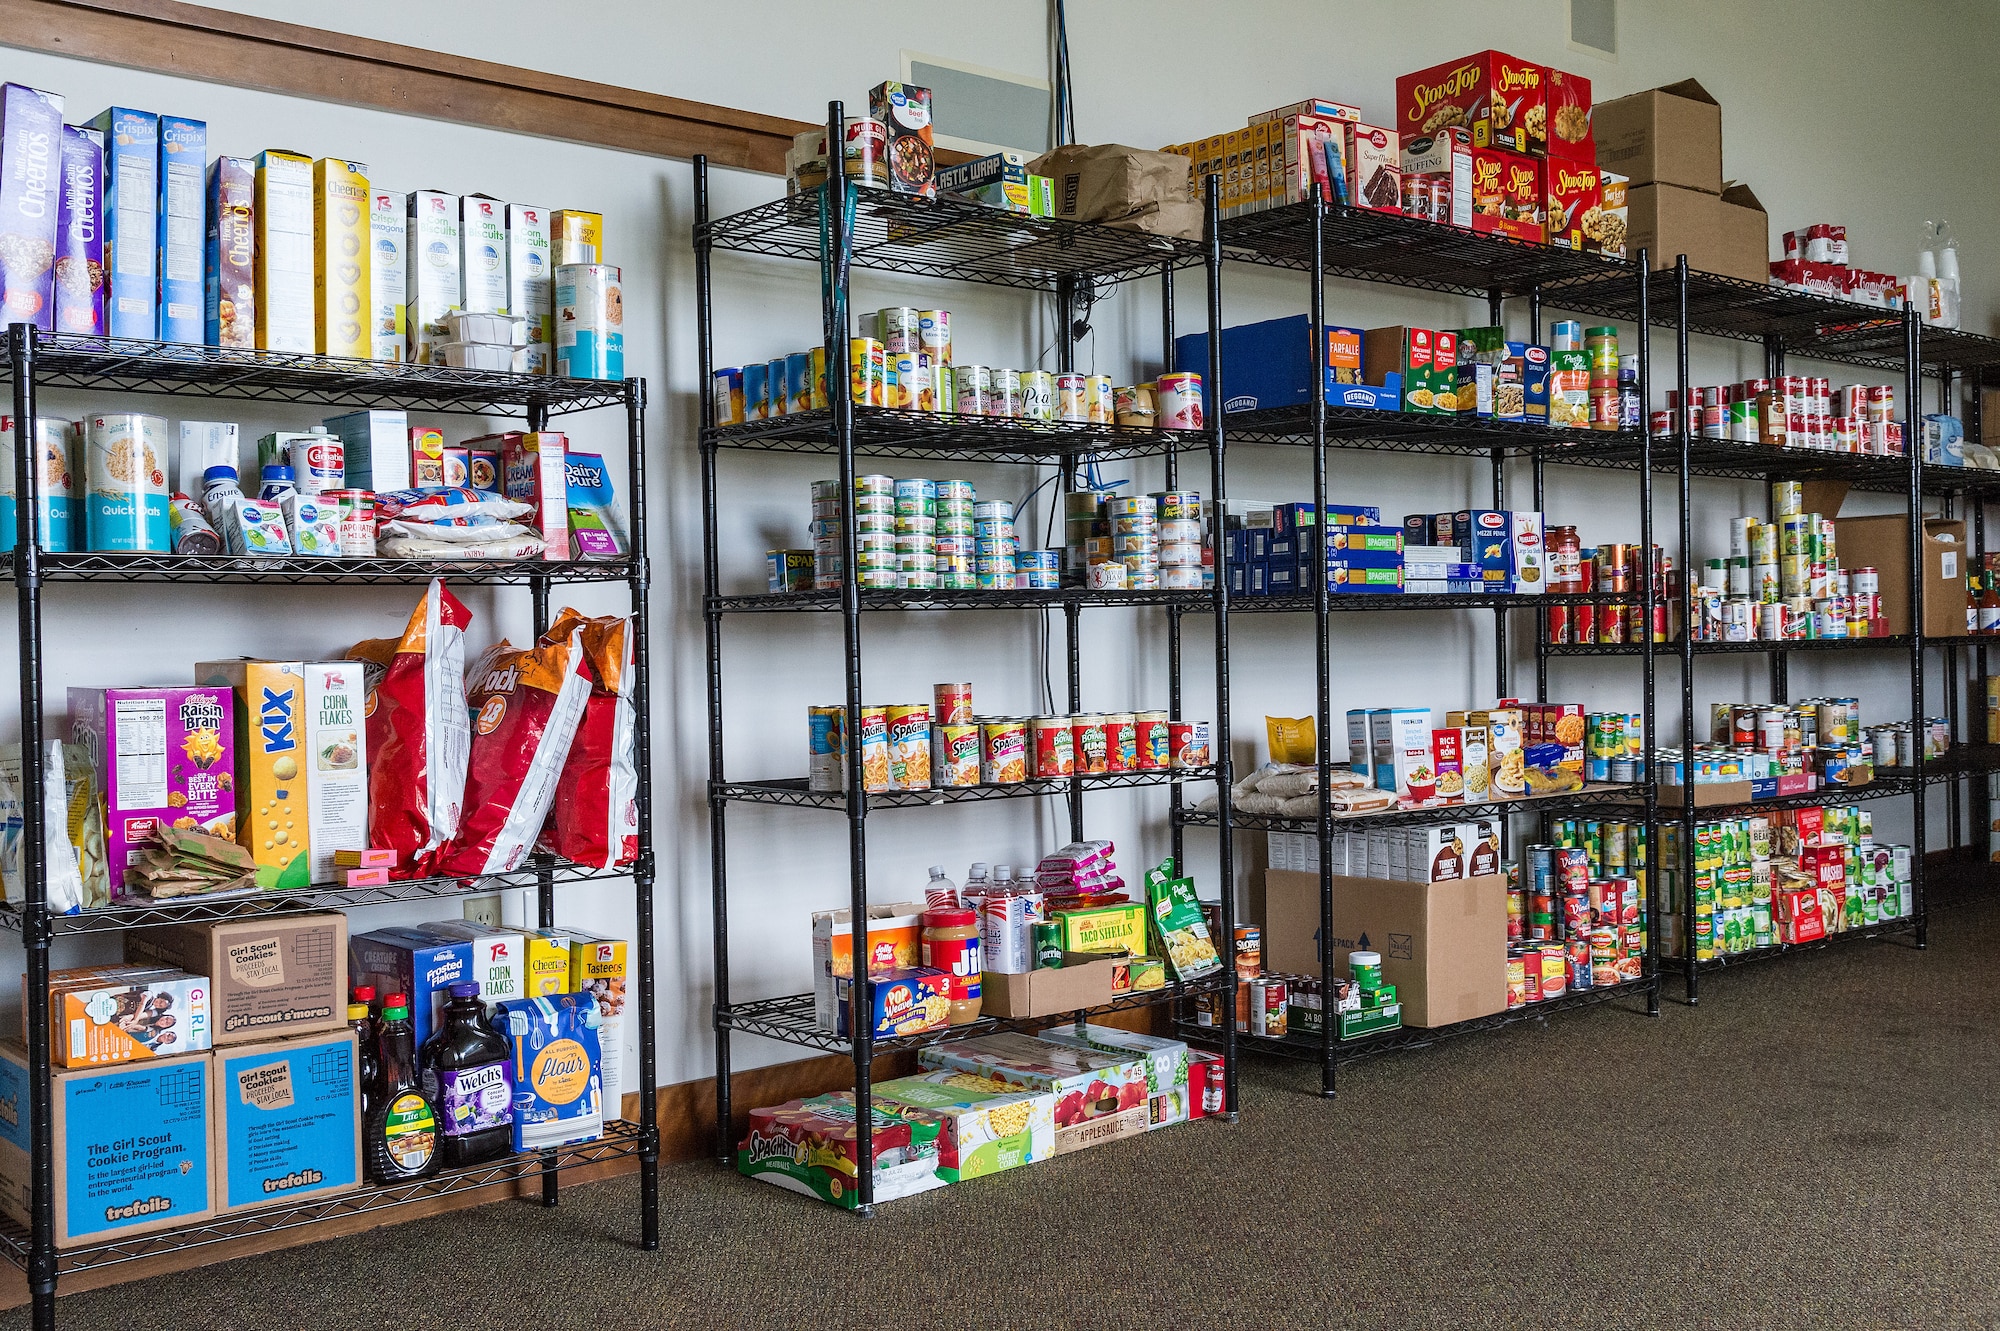 Food and non-perishable items sit on shelves in the Airman's Attic food pantry at Dover Air Force Base, Delaware, July 16, 2021. The pantry provides dorm Airmen a place to obtain donated items while the Patterson Dining Facility undergoes renovations. (U.S. Air Force photo by Roland Balik)